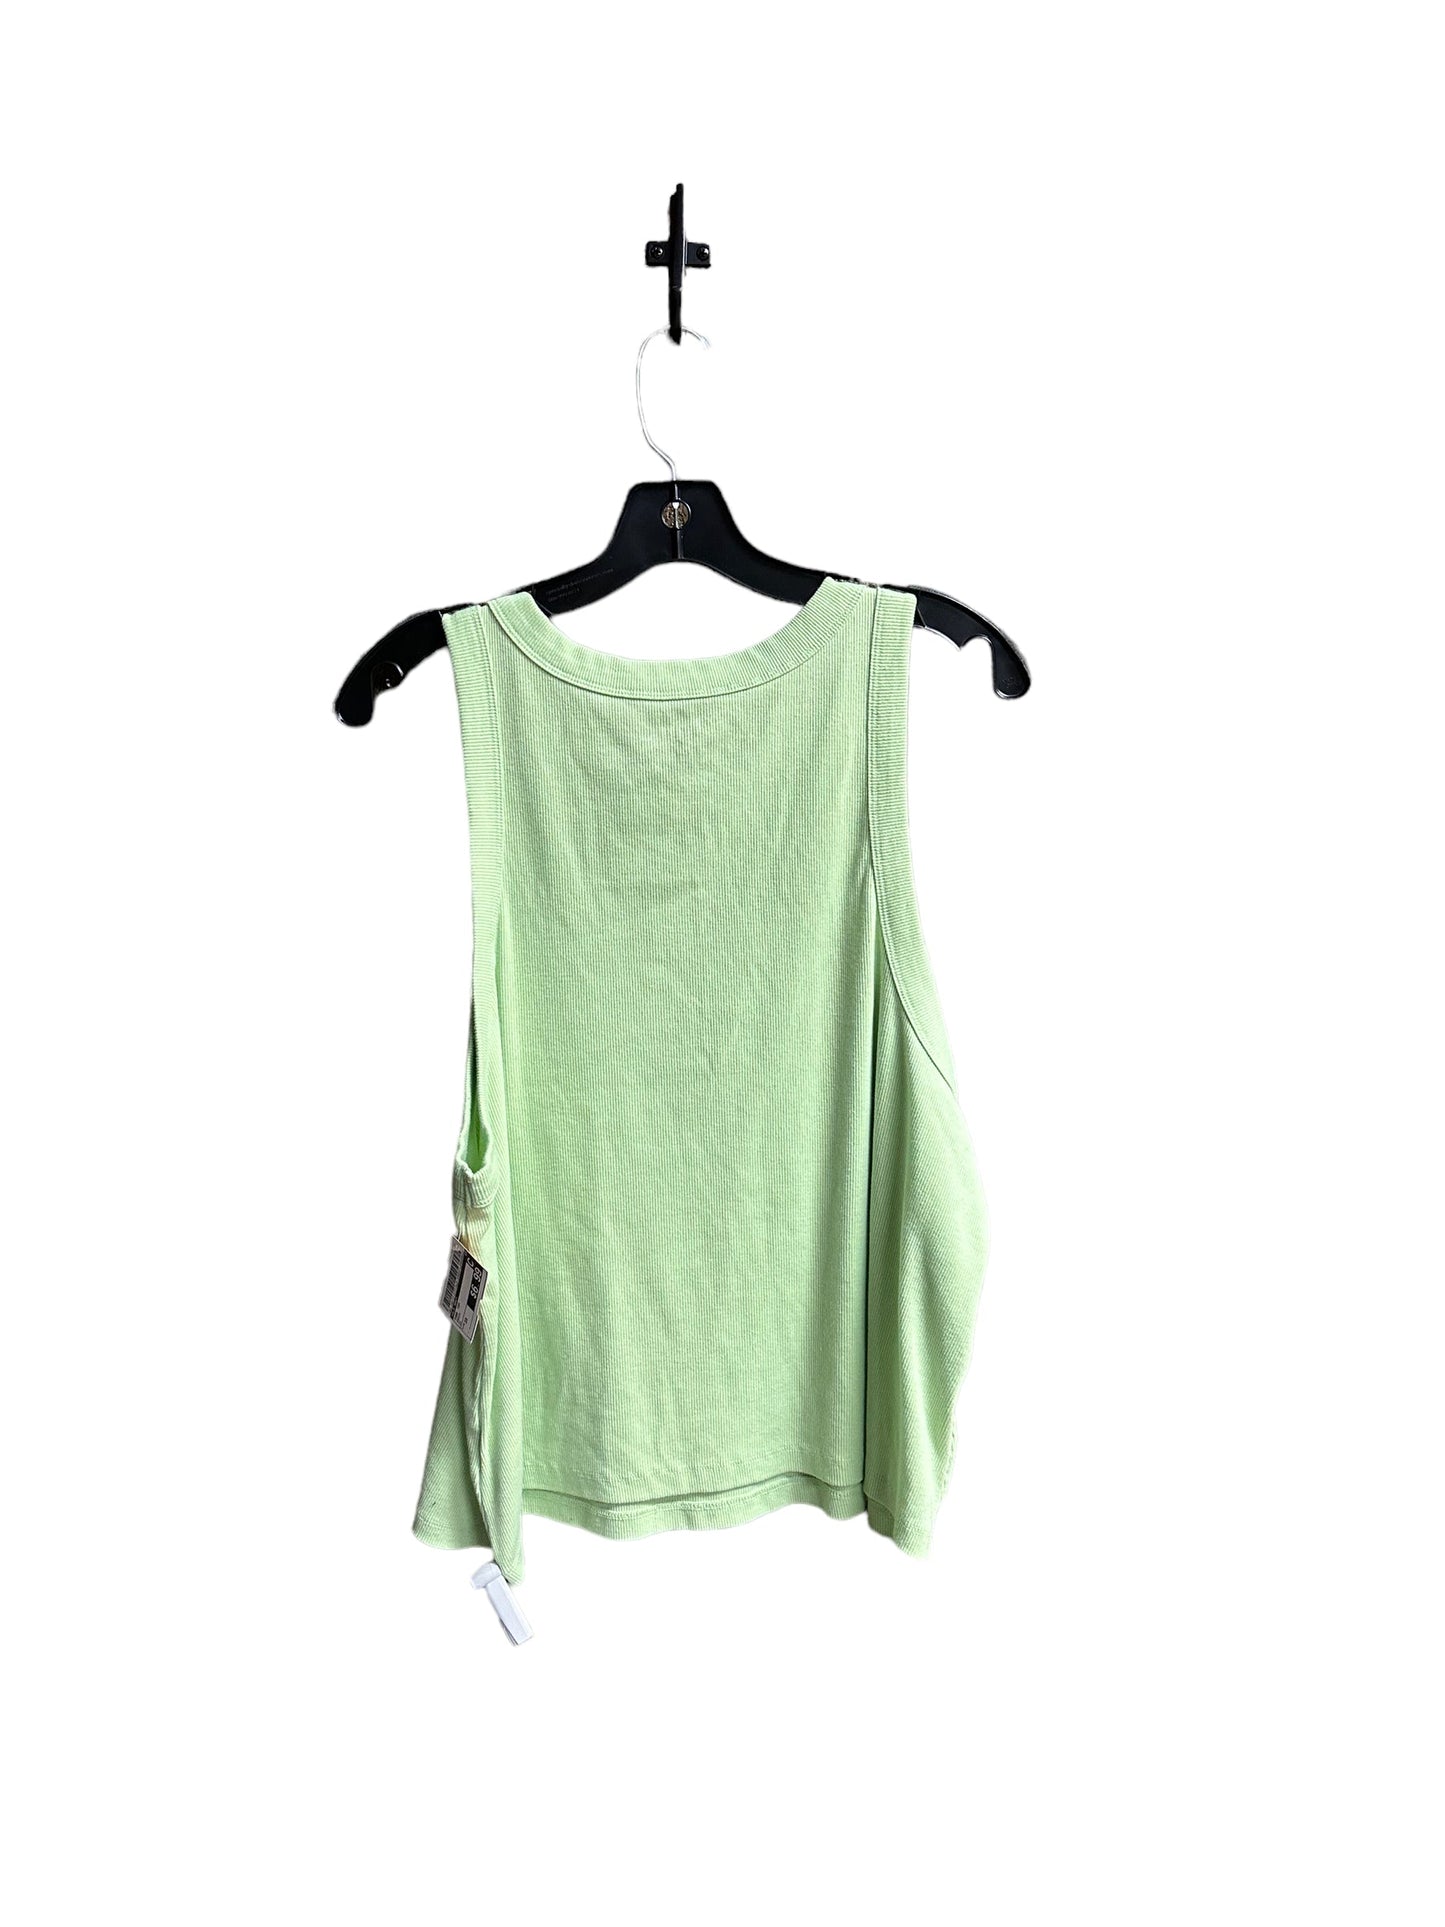 Tank Top By Old Navy  Size: 3x